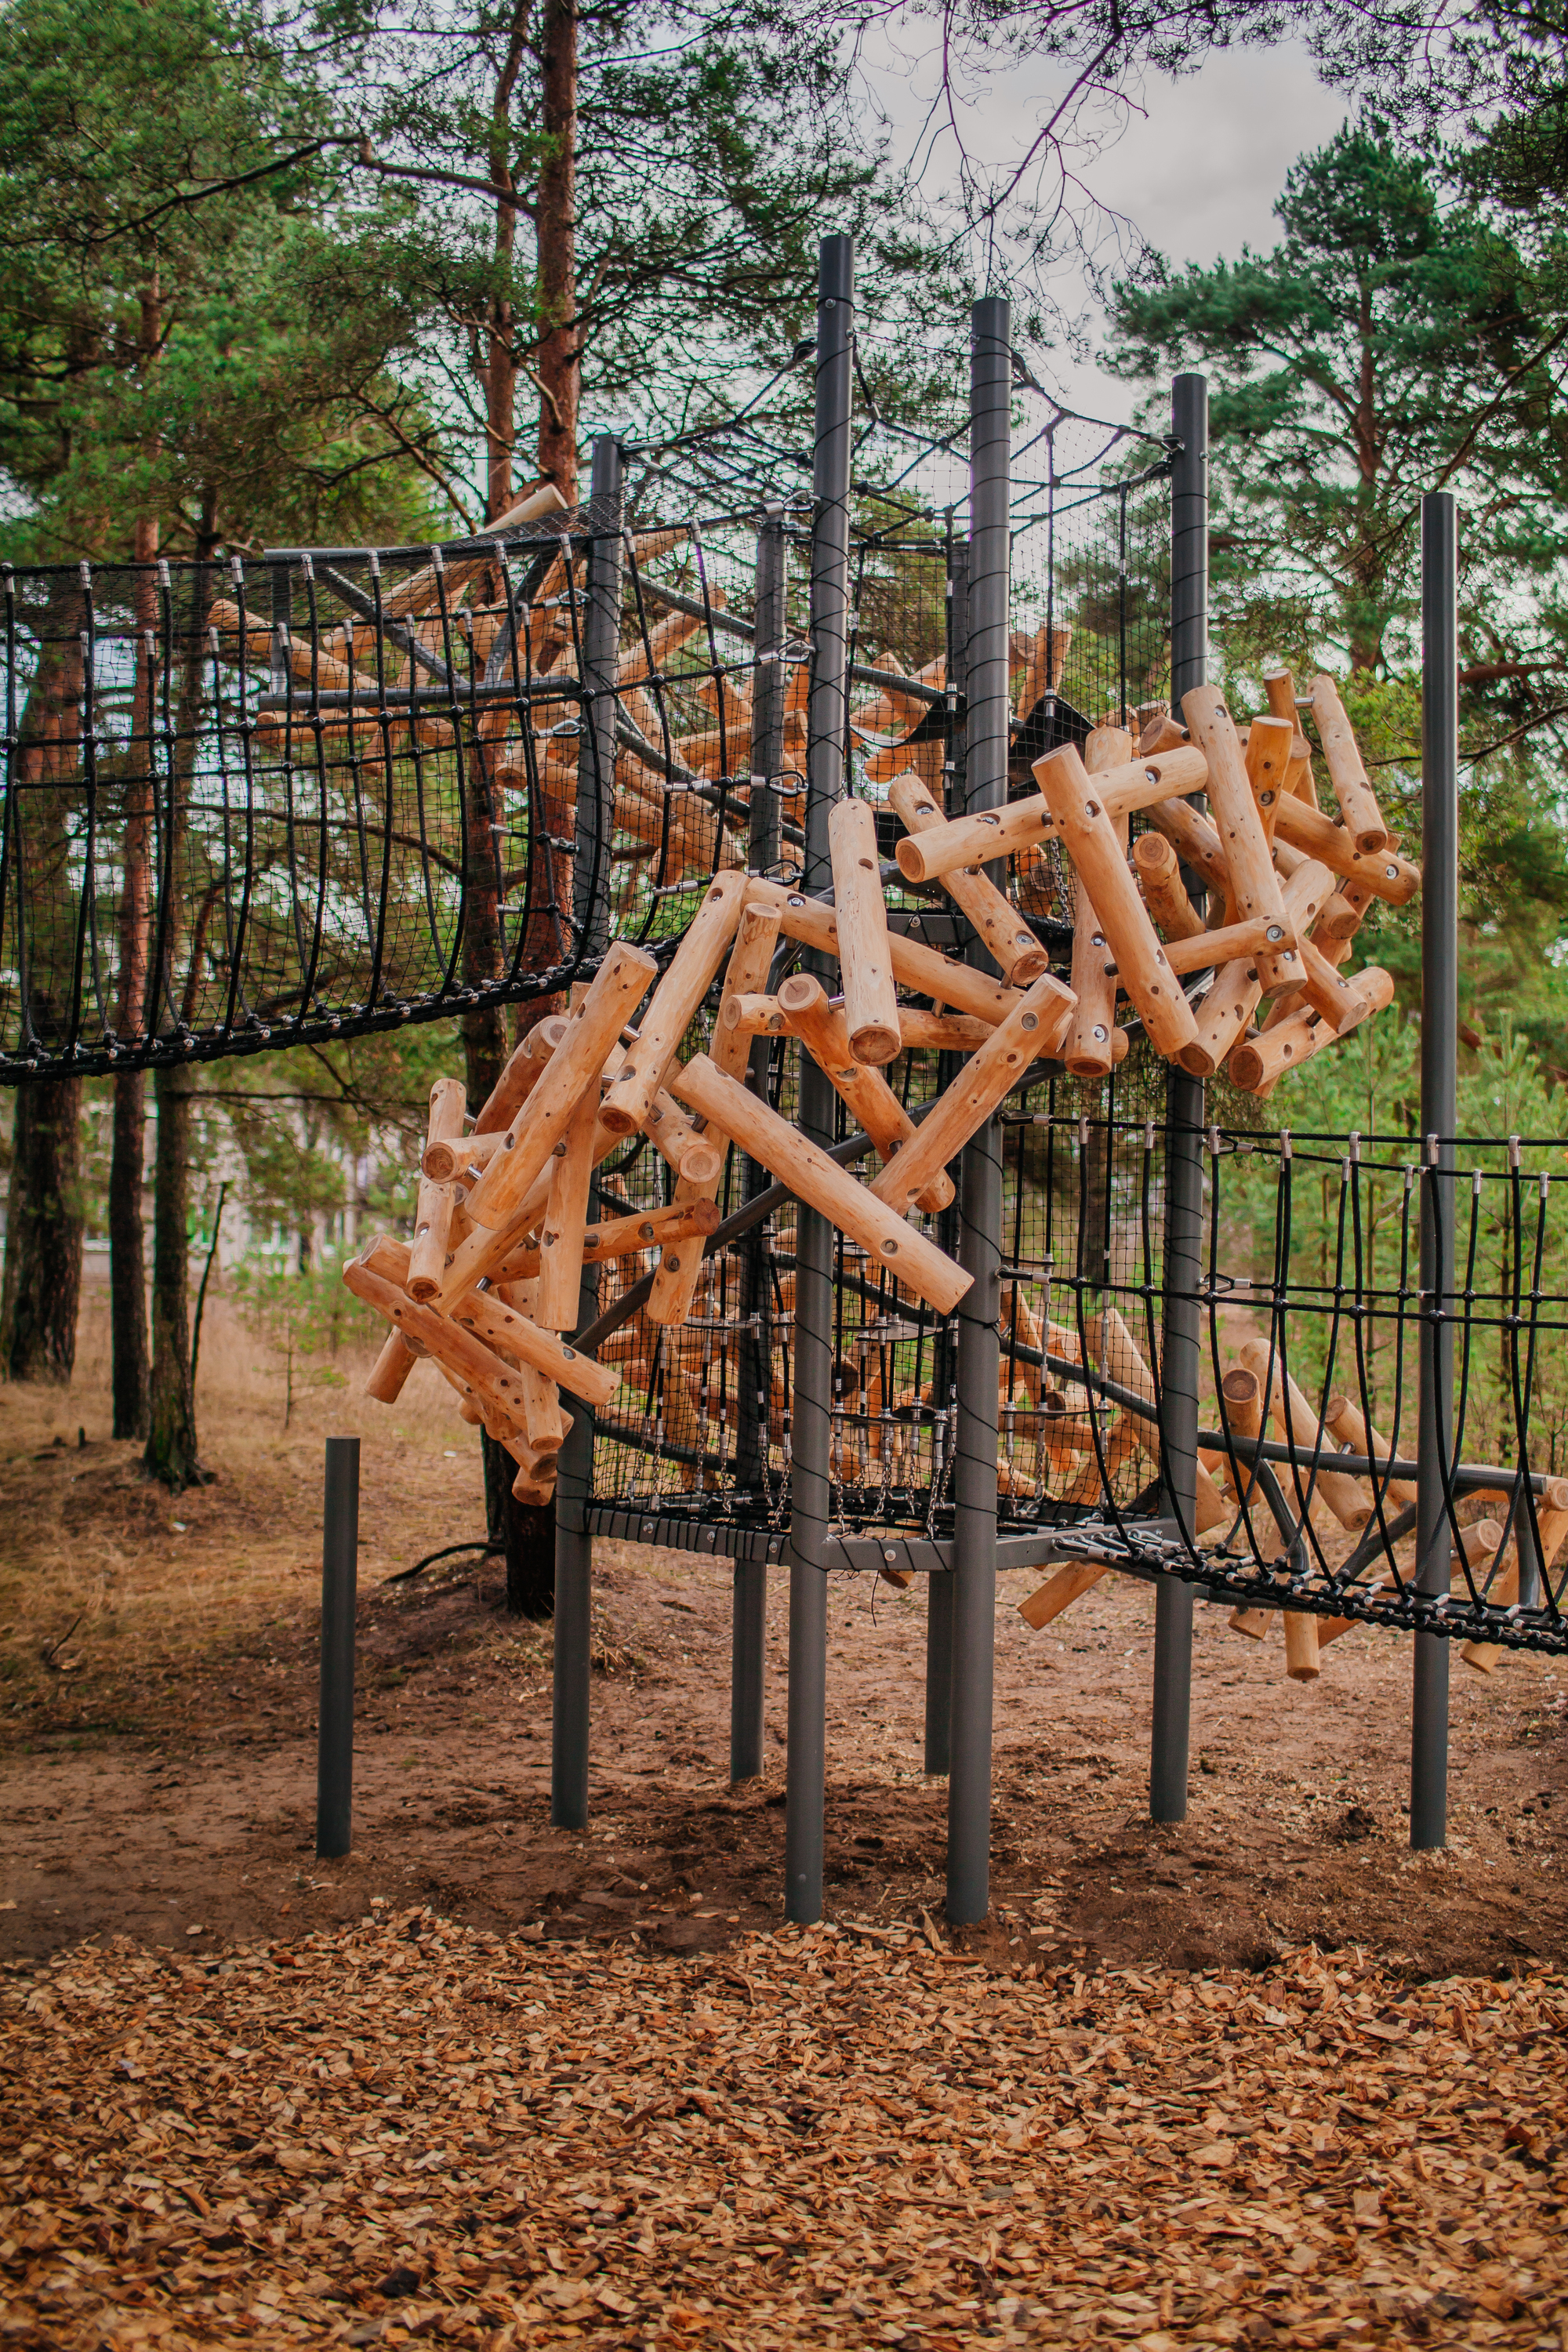 Eagles Land Playground as a Form of Beautiful Cooperation between the Community and Architects